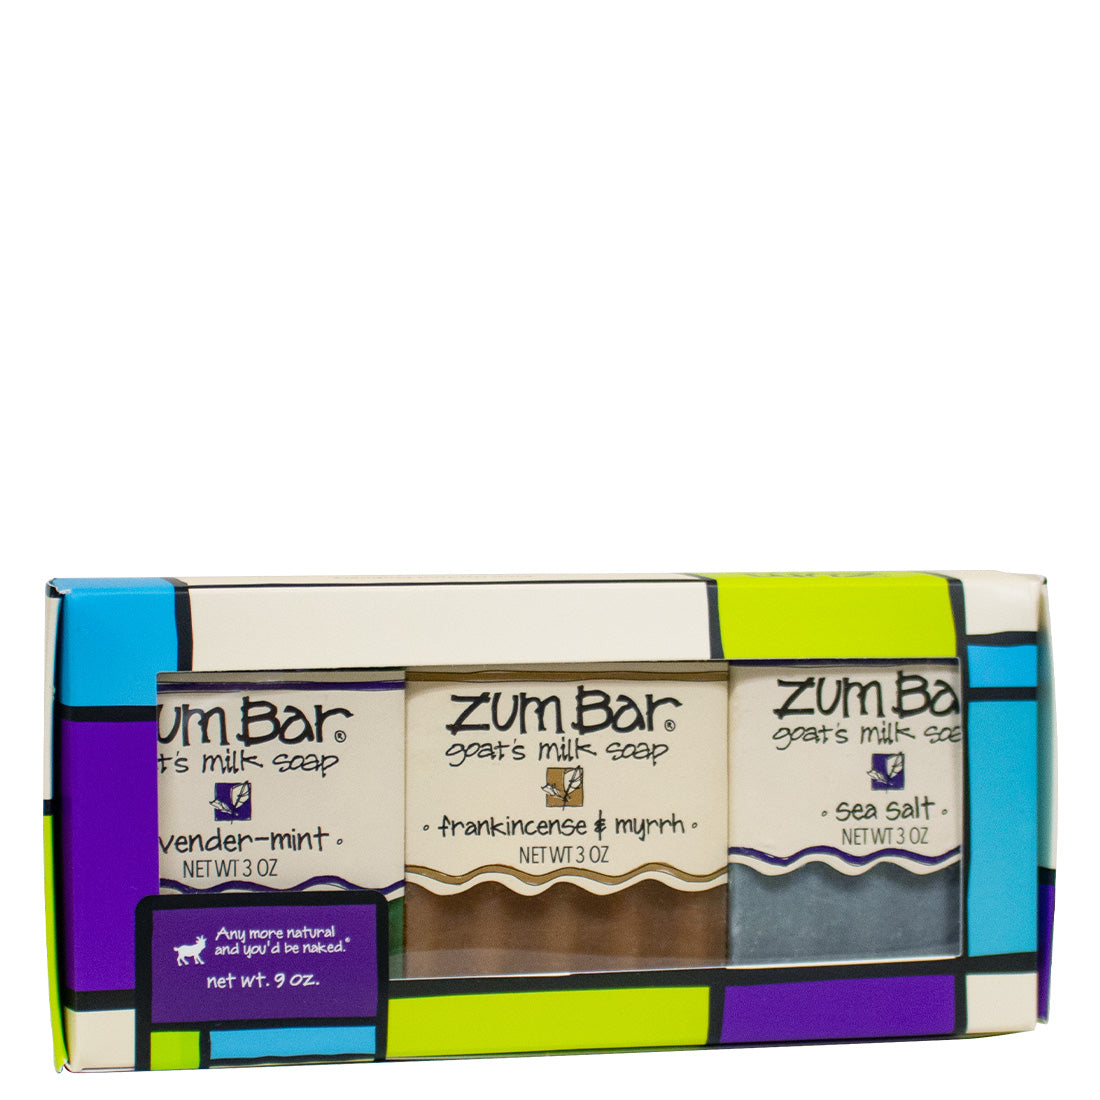 A colorful box with 3 labeled Zum Bar Soaps including Lavender-Mint, Frankincense & Myrrh, and Sea Salt.